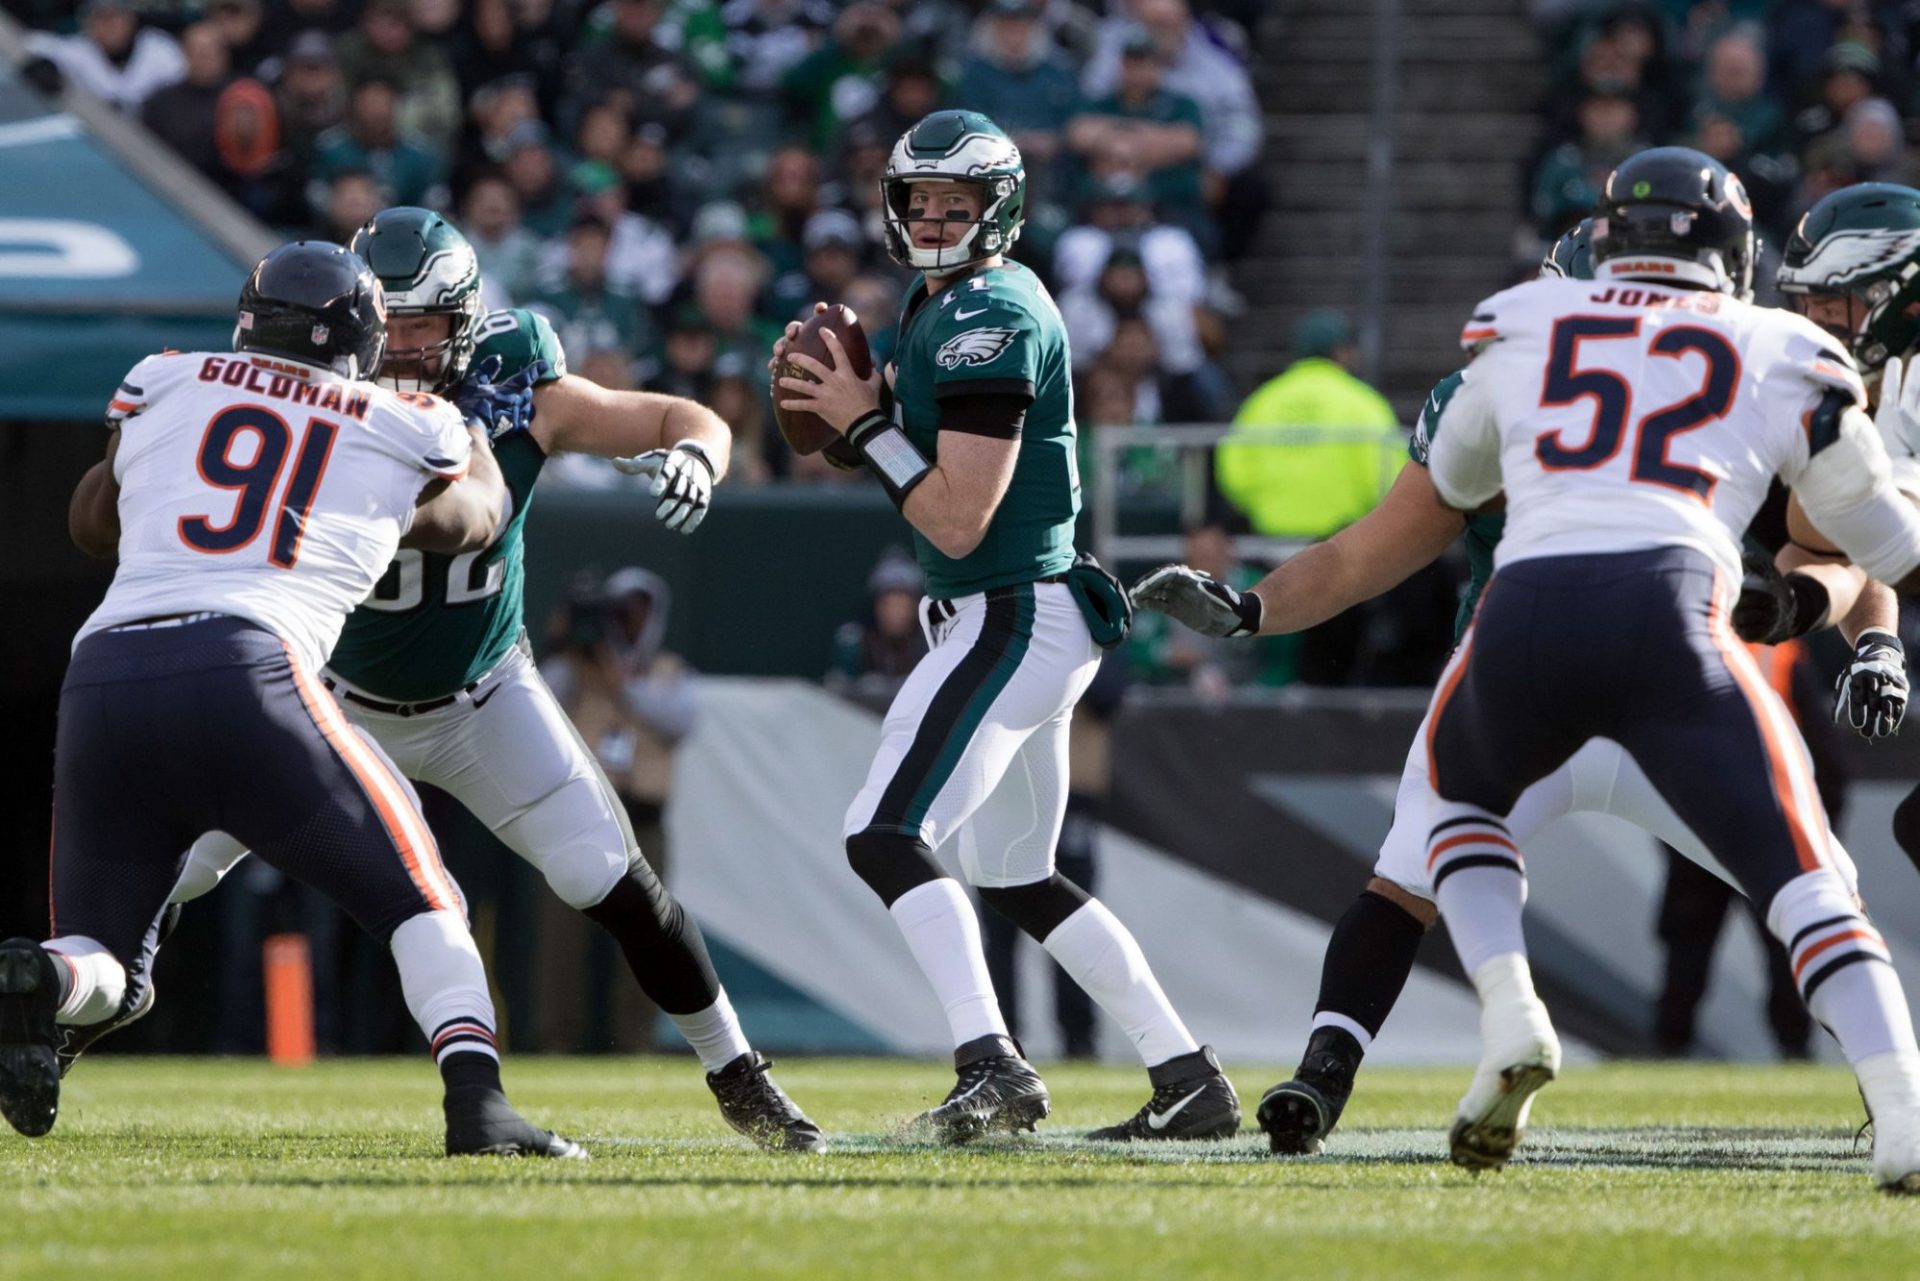 Twitter reacts to rumors of Carson Wentz potentially touchdown with Bears